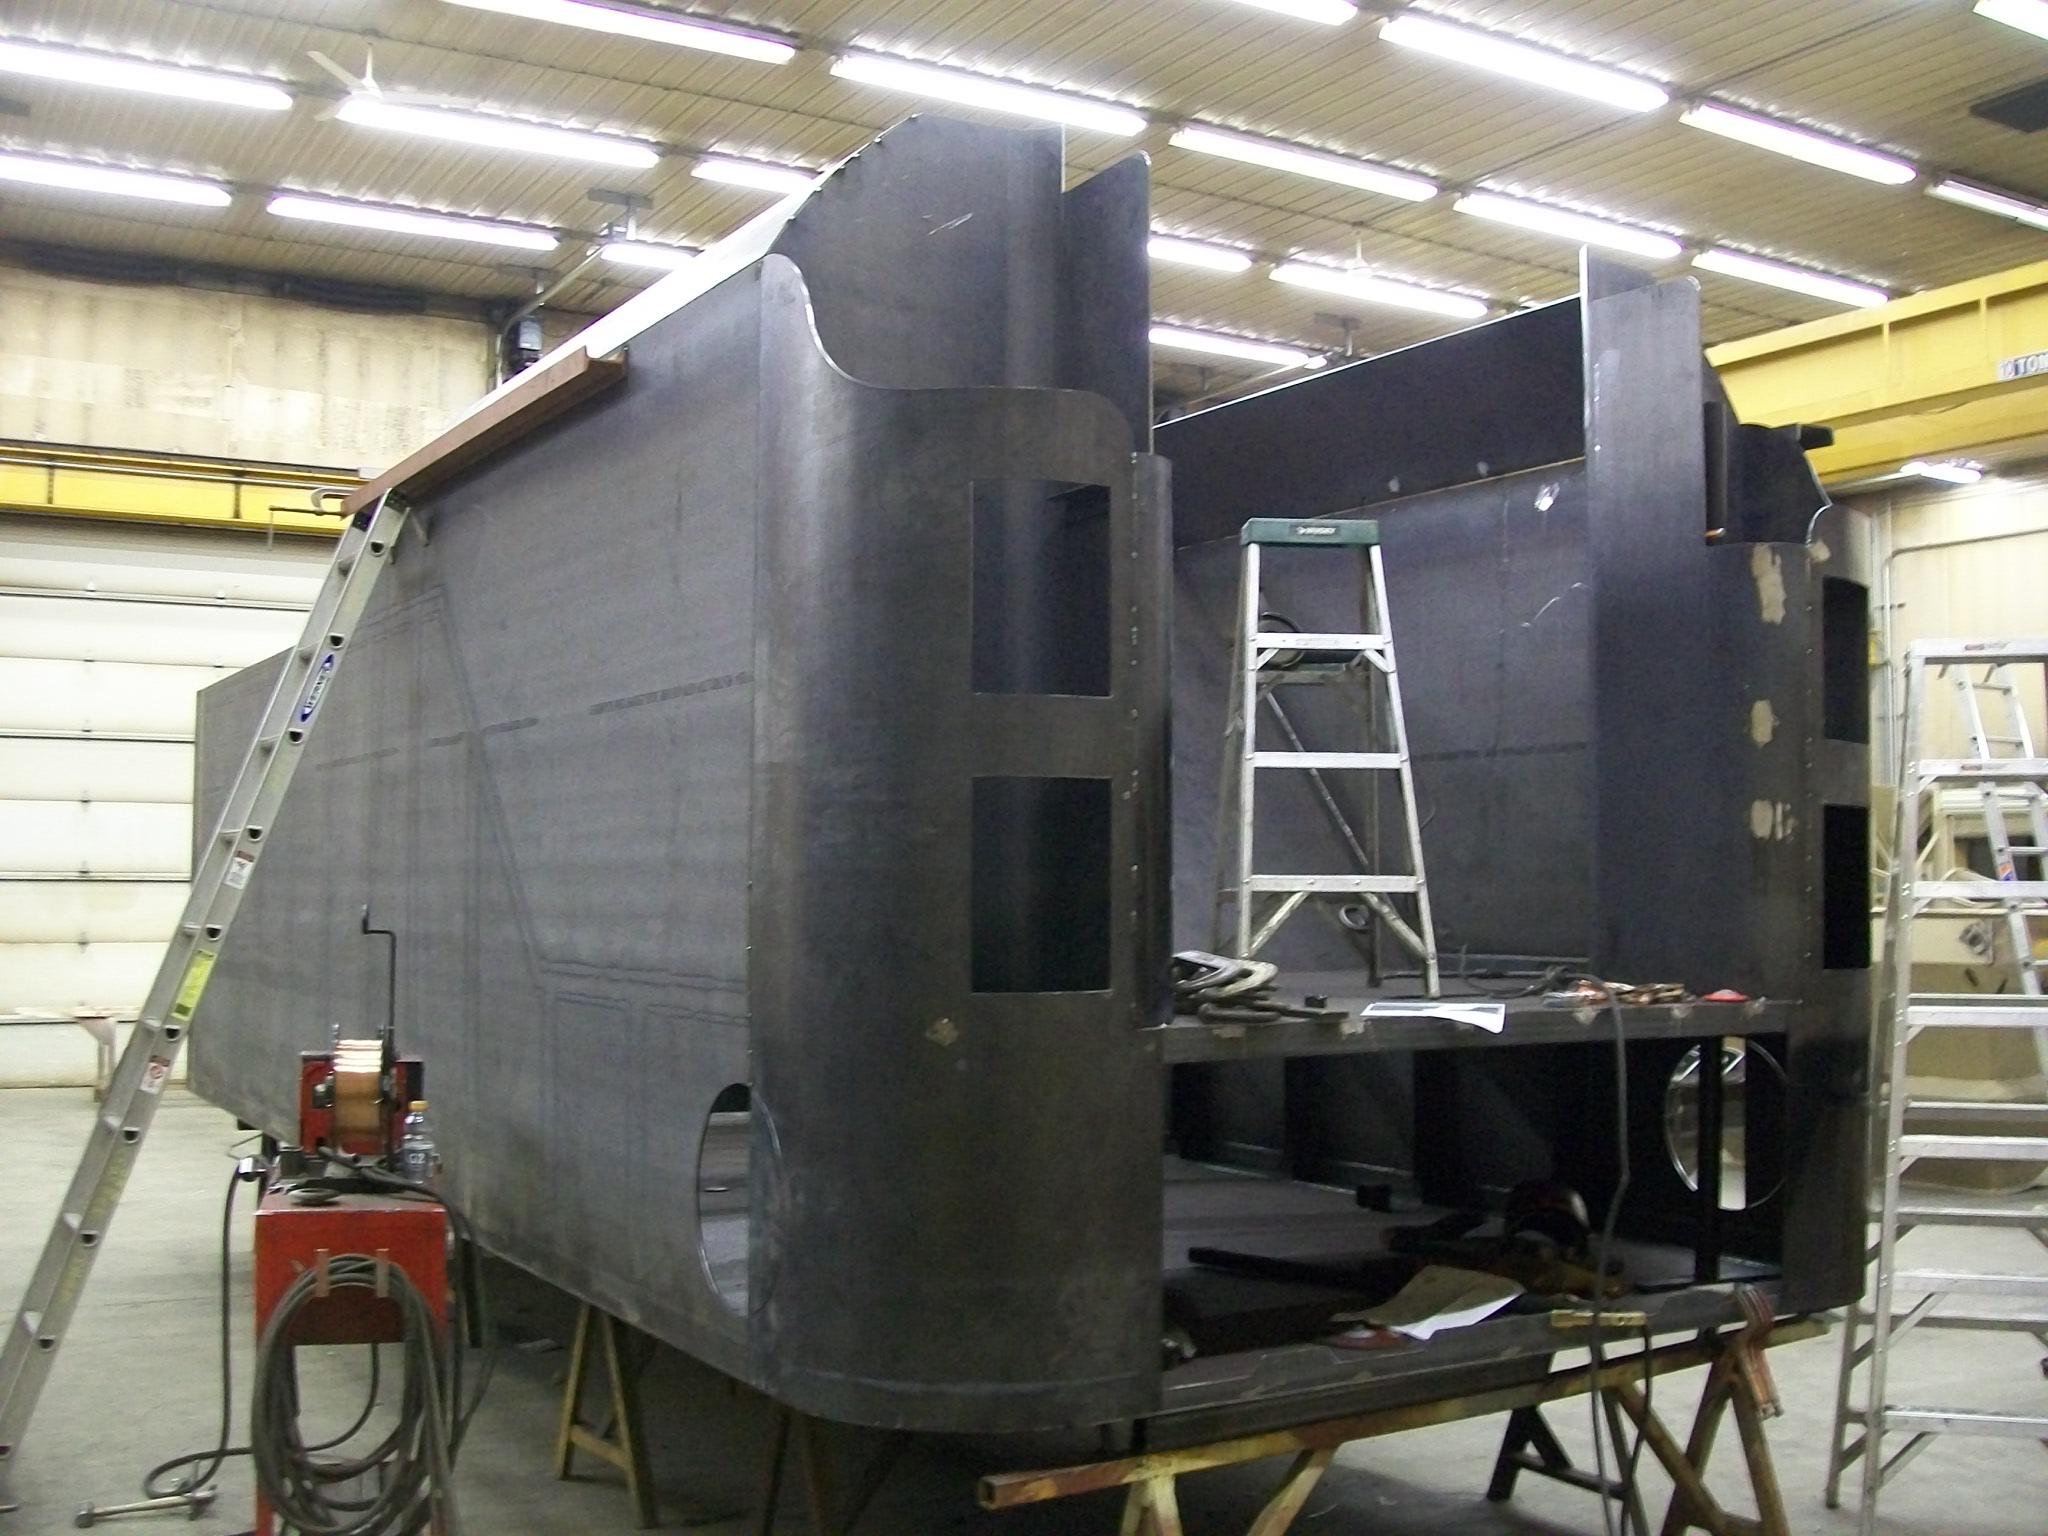 New C&NW 1385 tender tank under construction at DRM Industries. March 1, 2012. Photo by DRM Industries